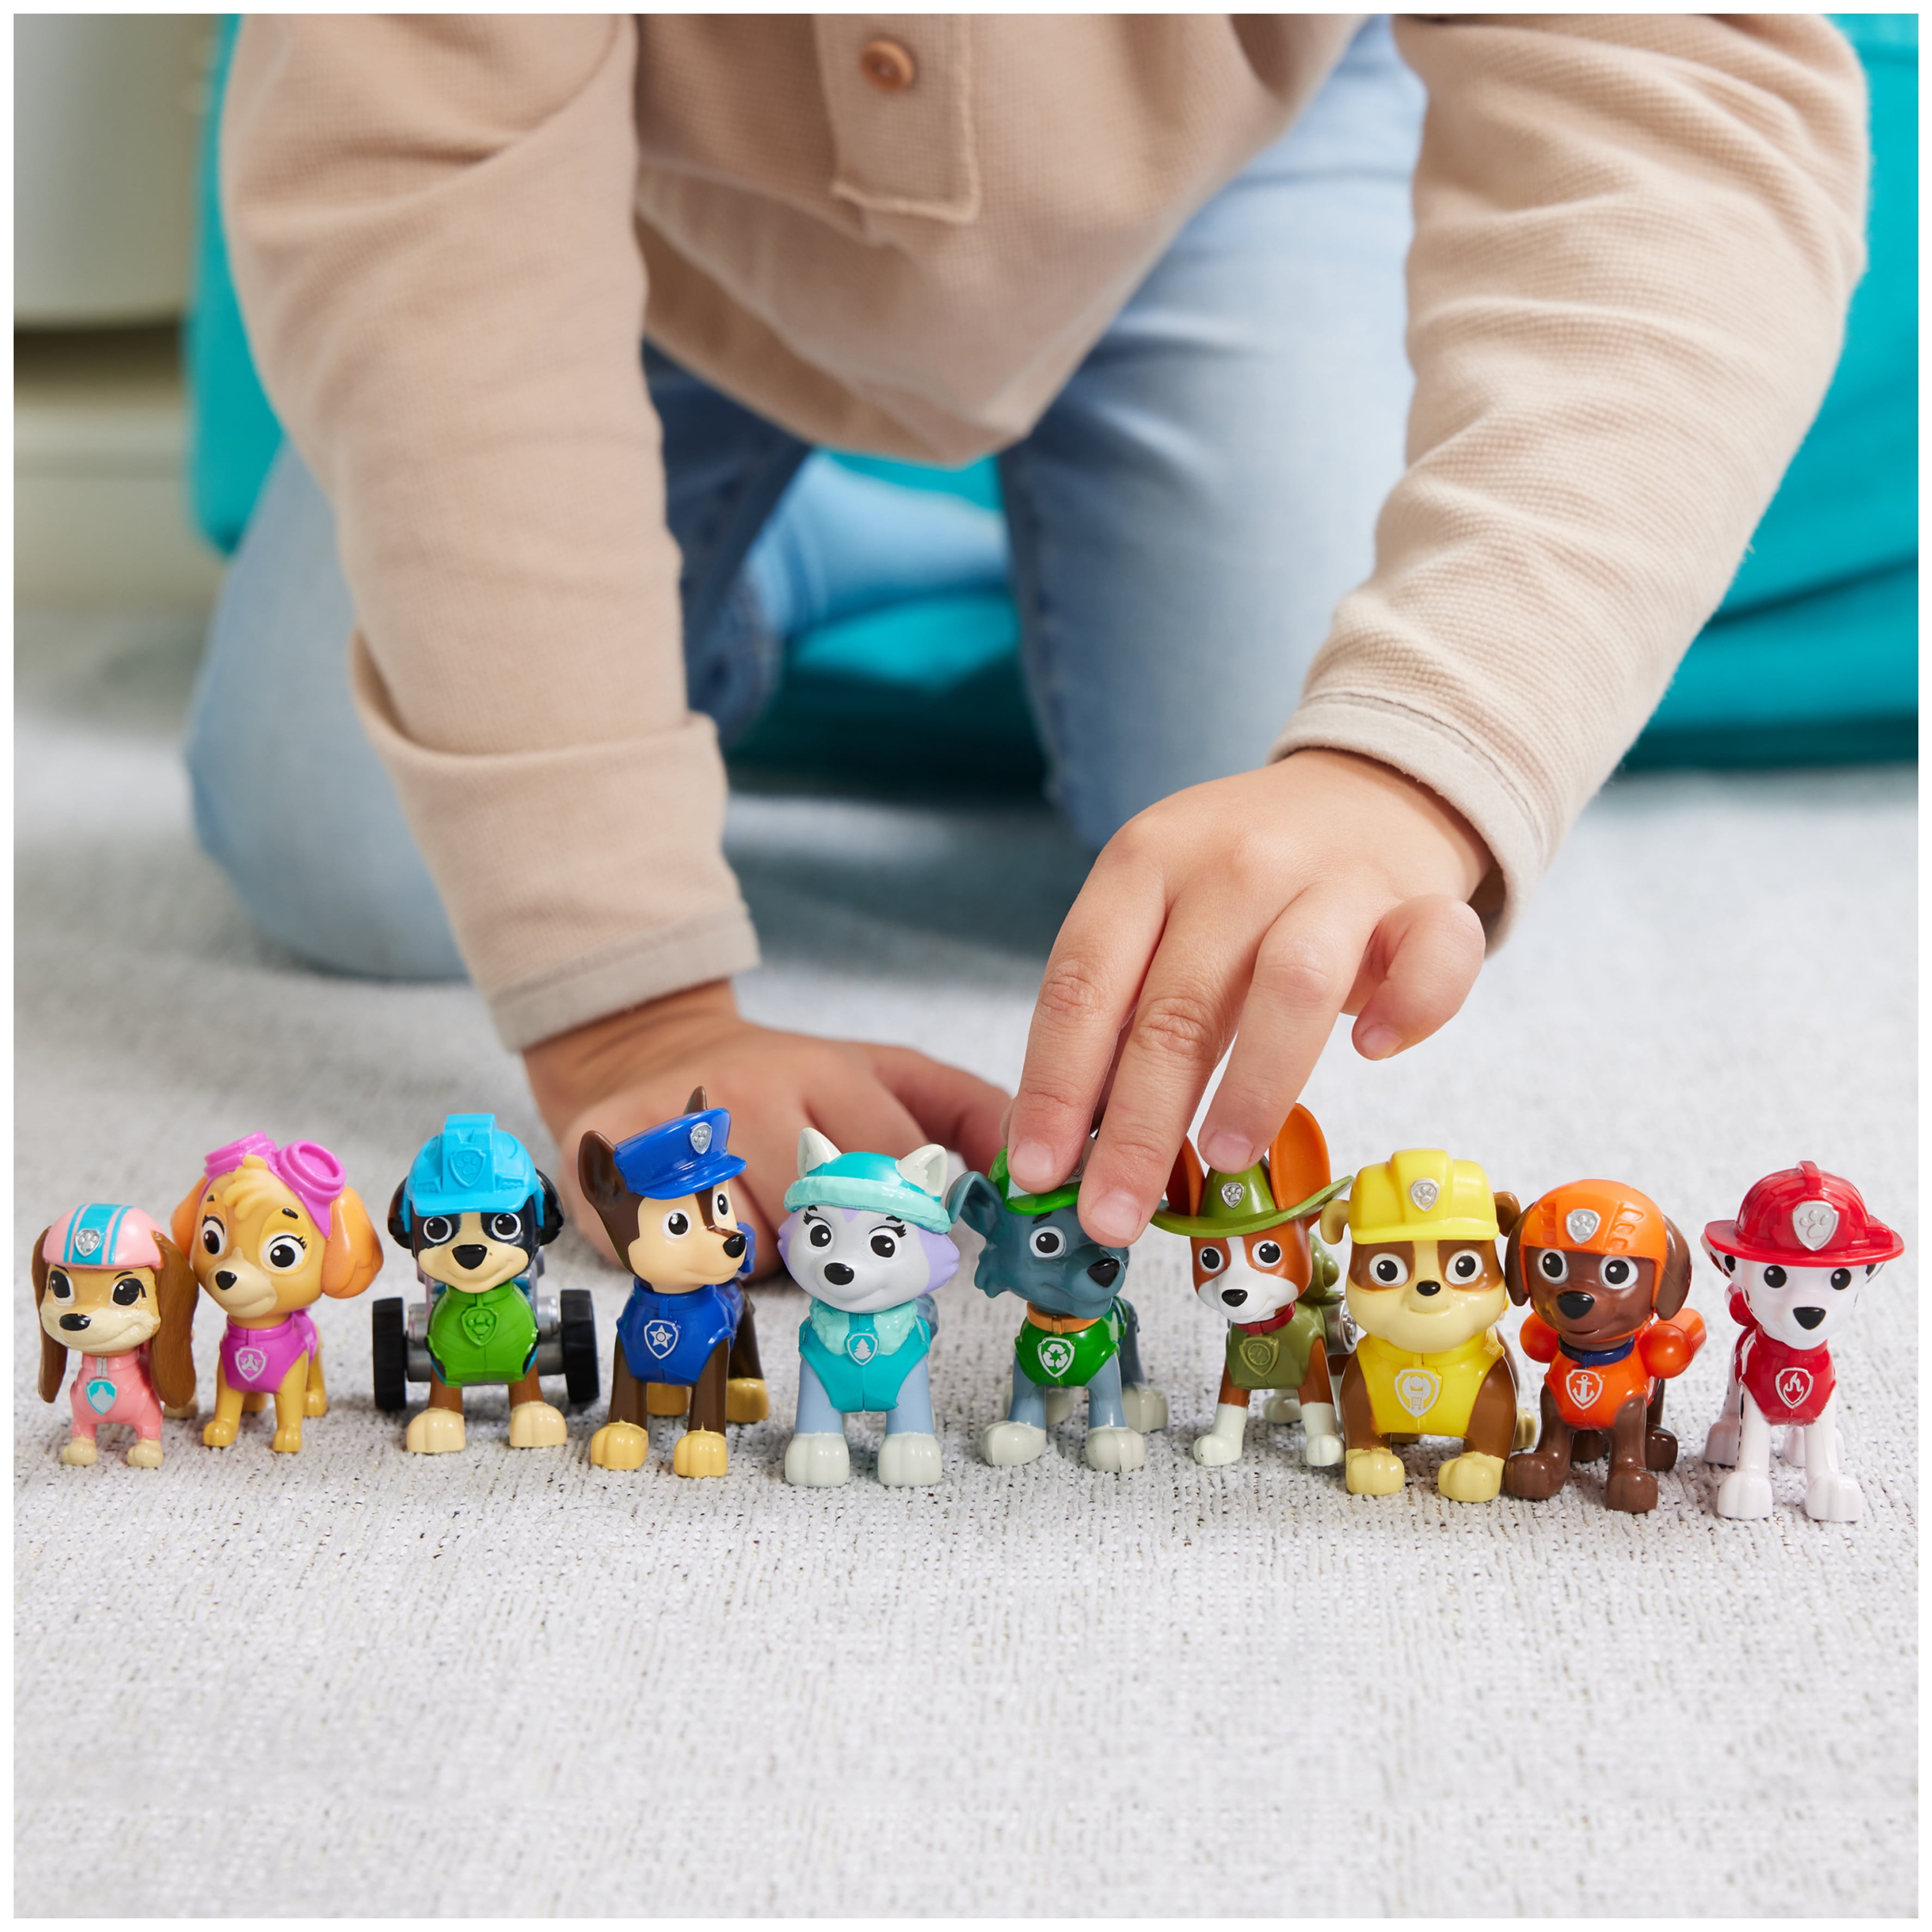 PAW Patrol, 10th Anniversary, All Paws On Deck 10 Collectible Toy Figures Gift Pack - 3